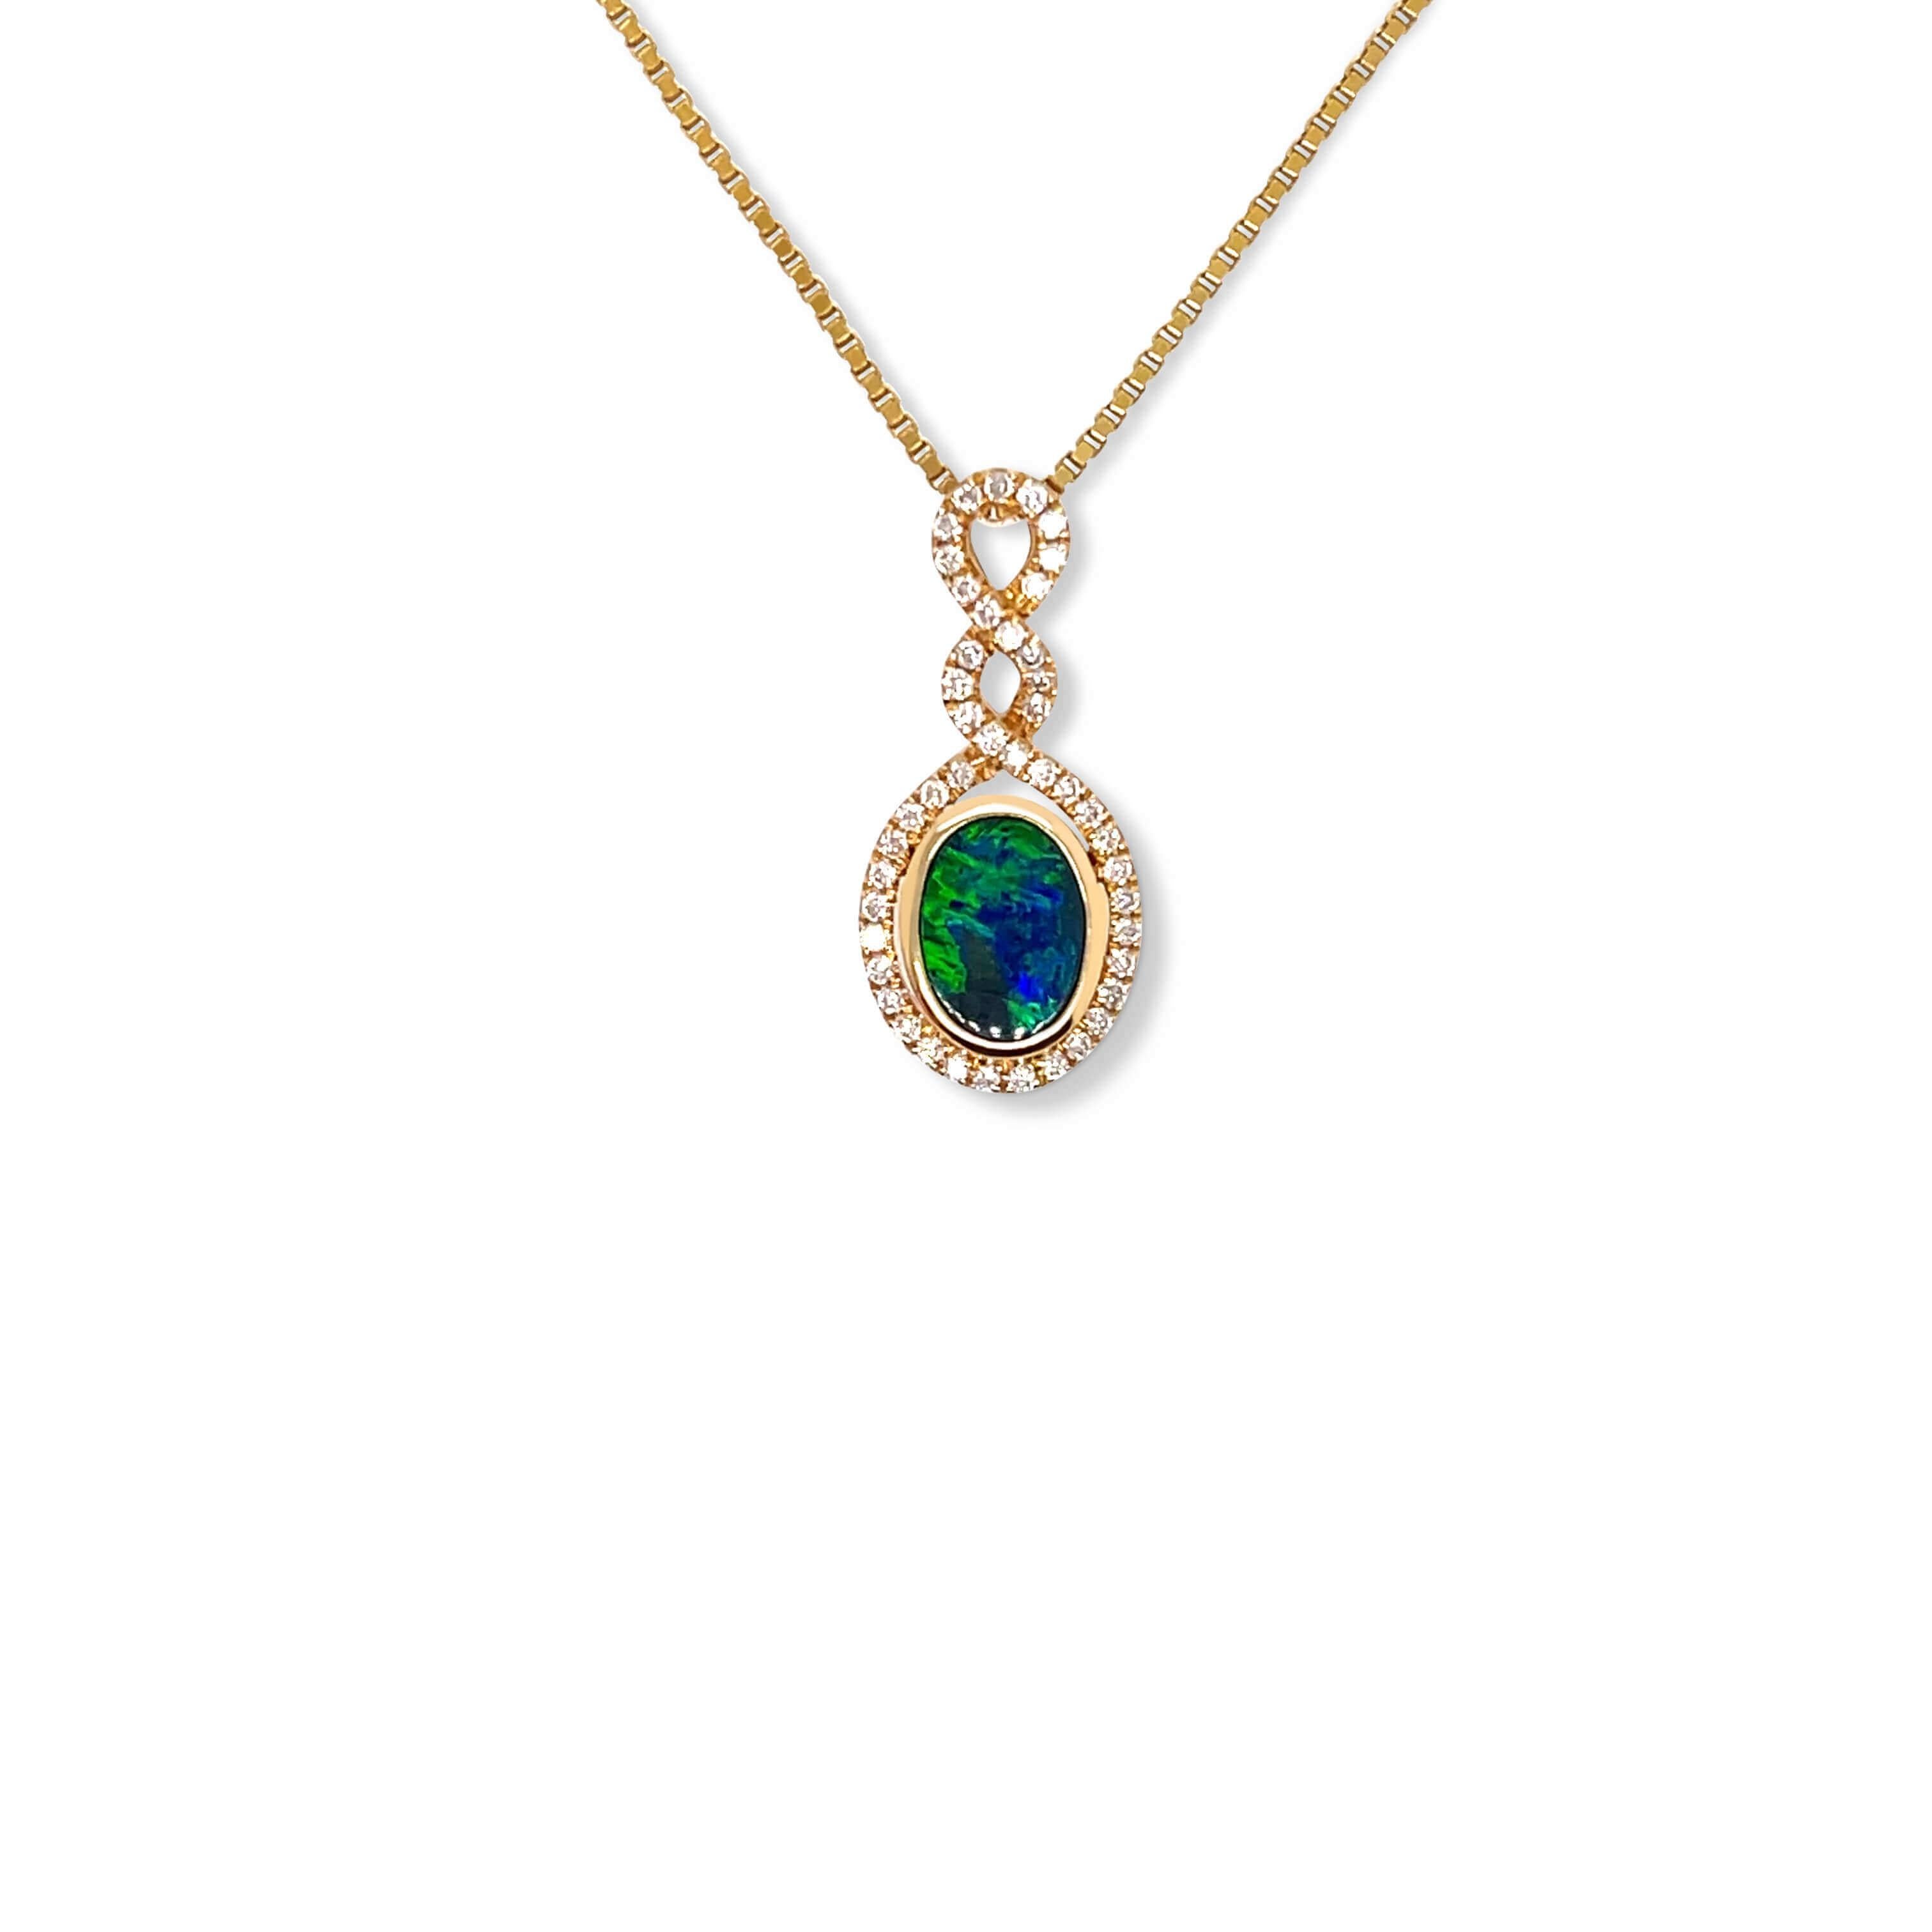 Contemporary Australian 0.44ct Opal Doublet Pendant Necklace in 18K Yellow Gold with Diamonds